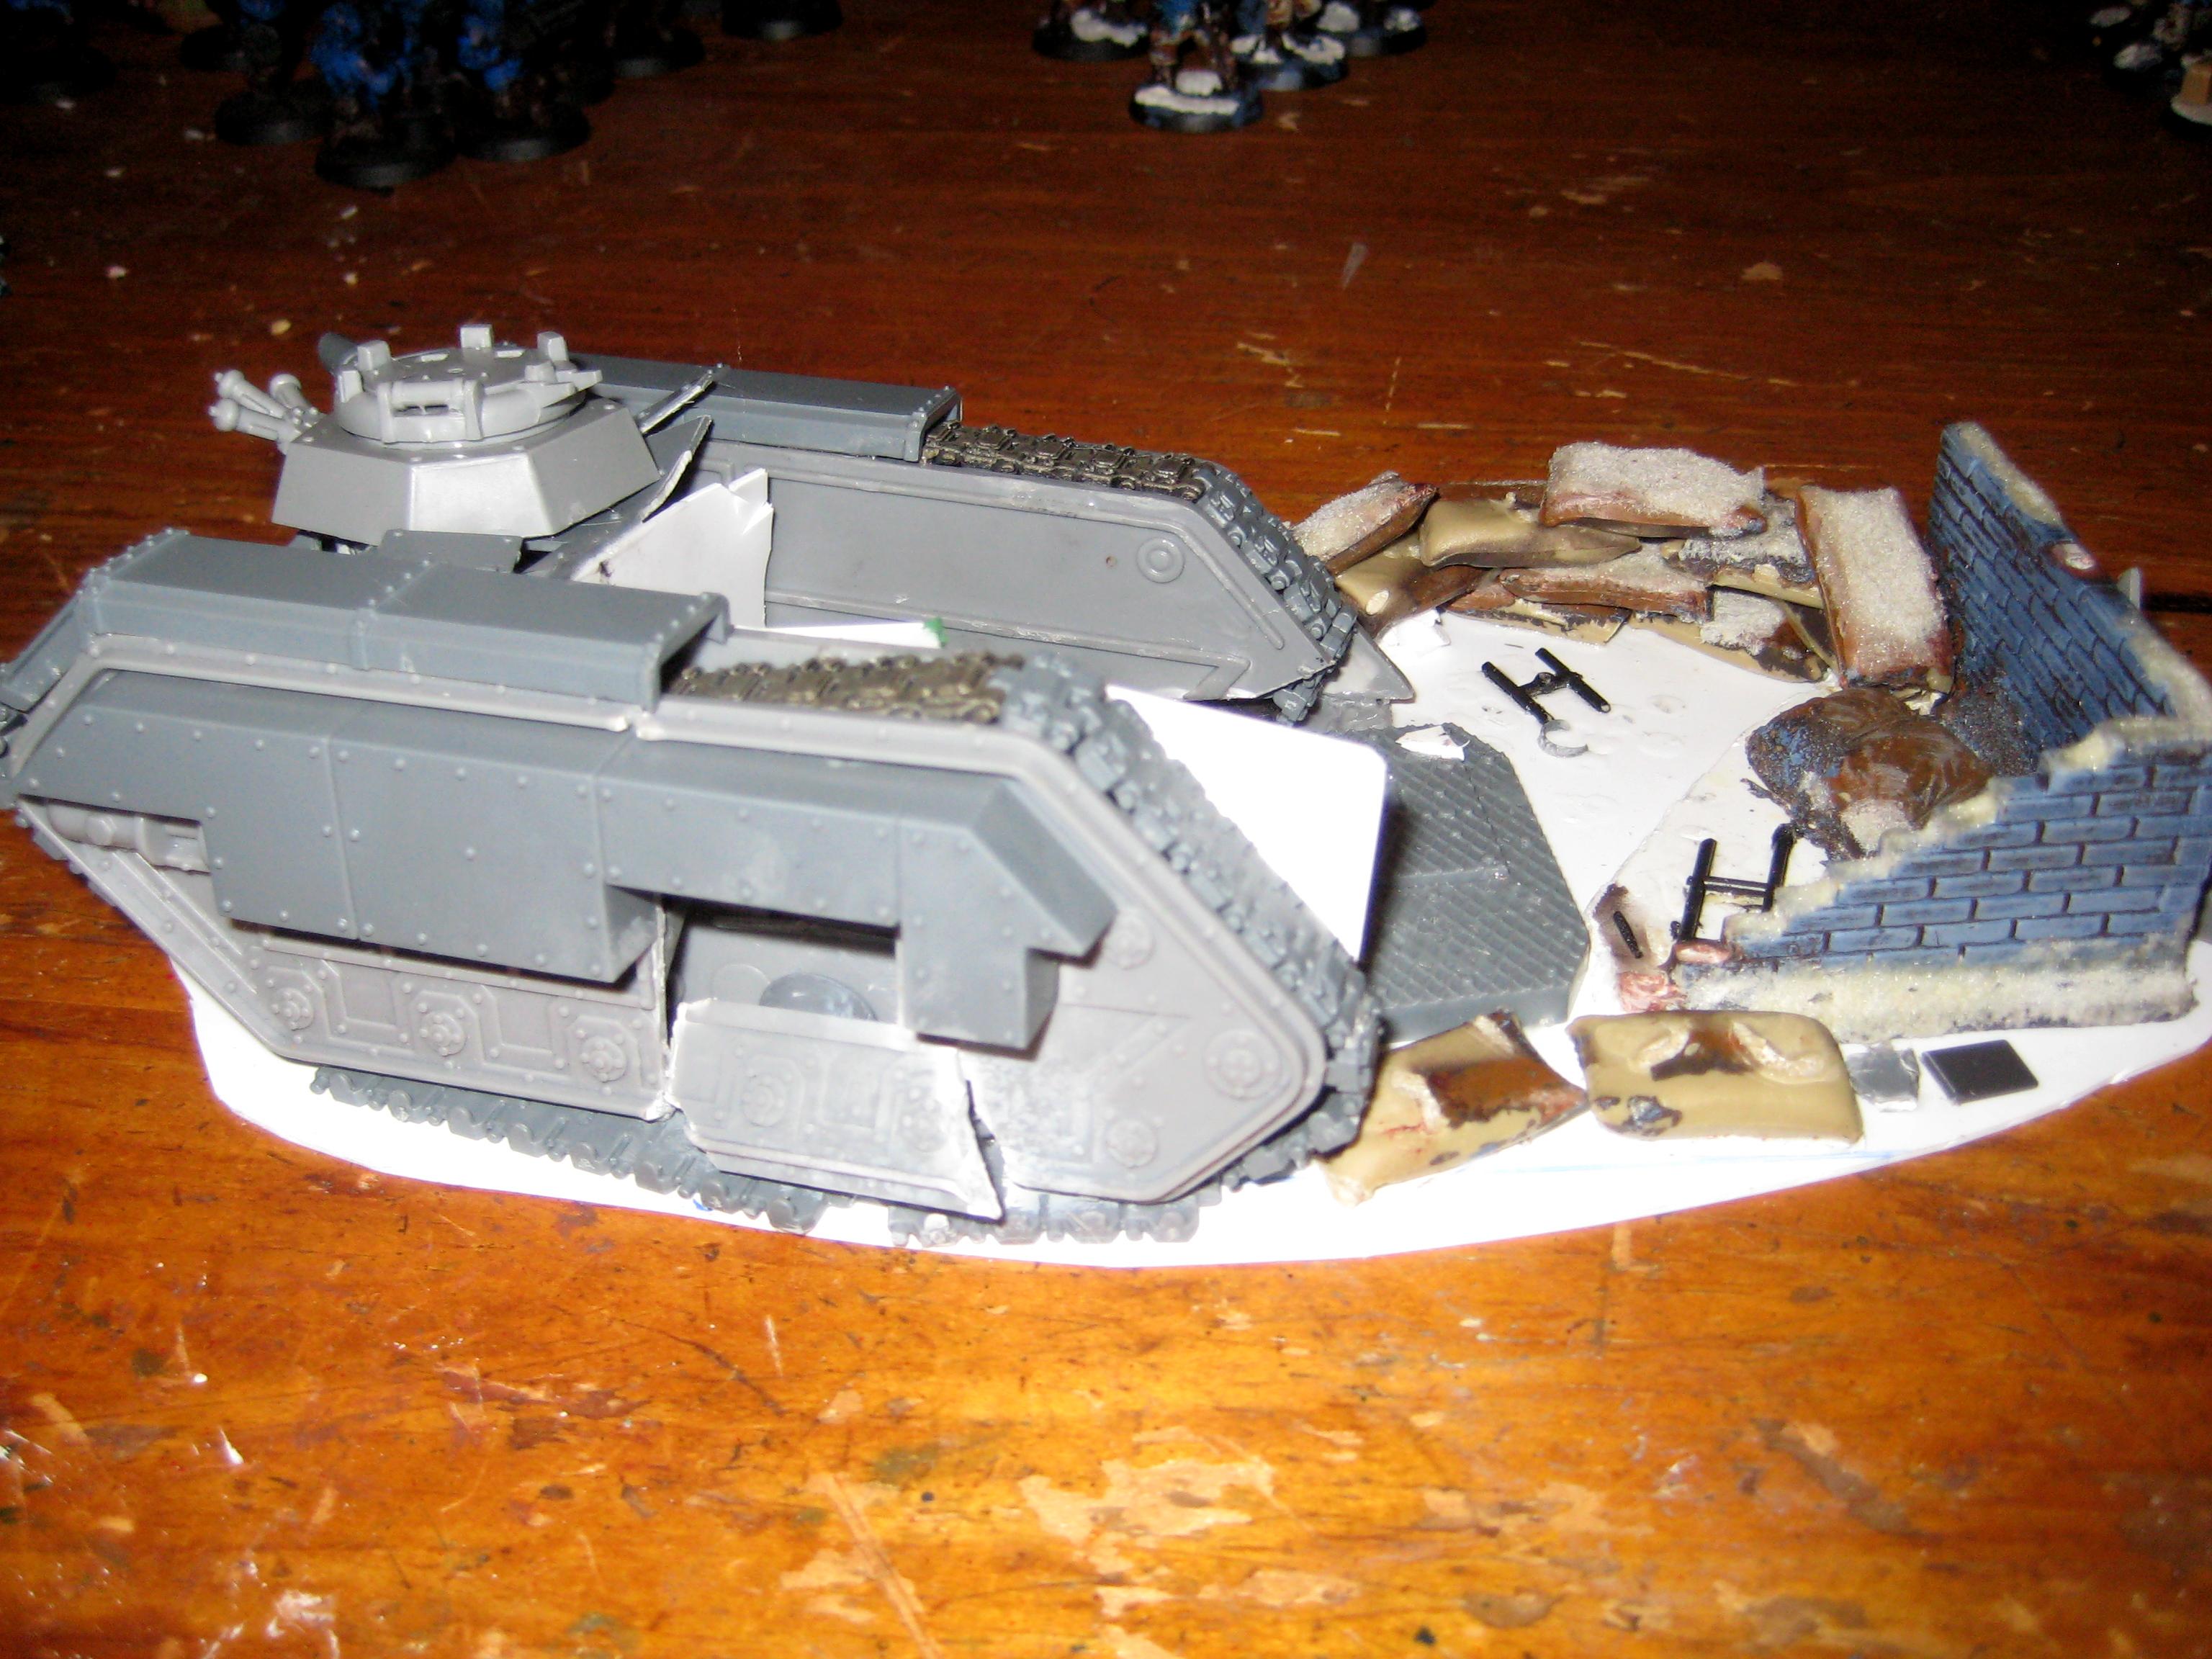 Terrain, Wrecked Chimera Emplacement